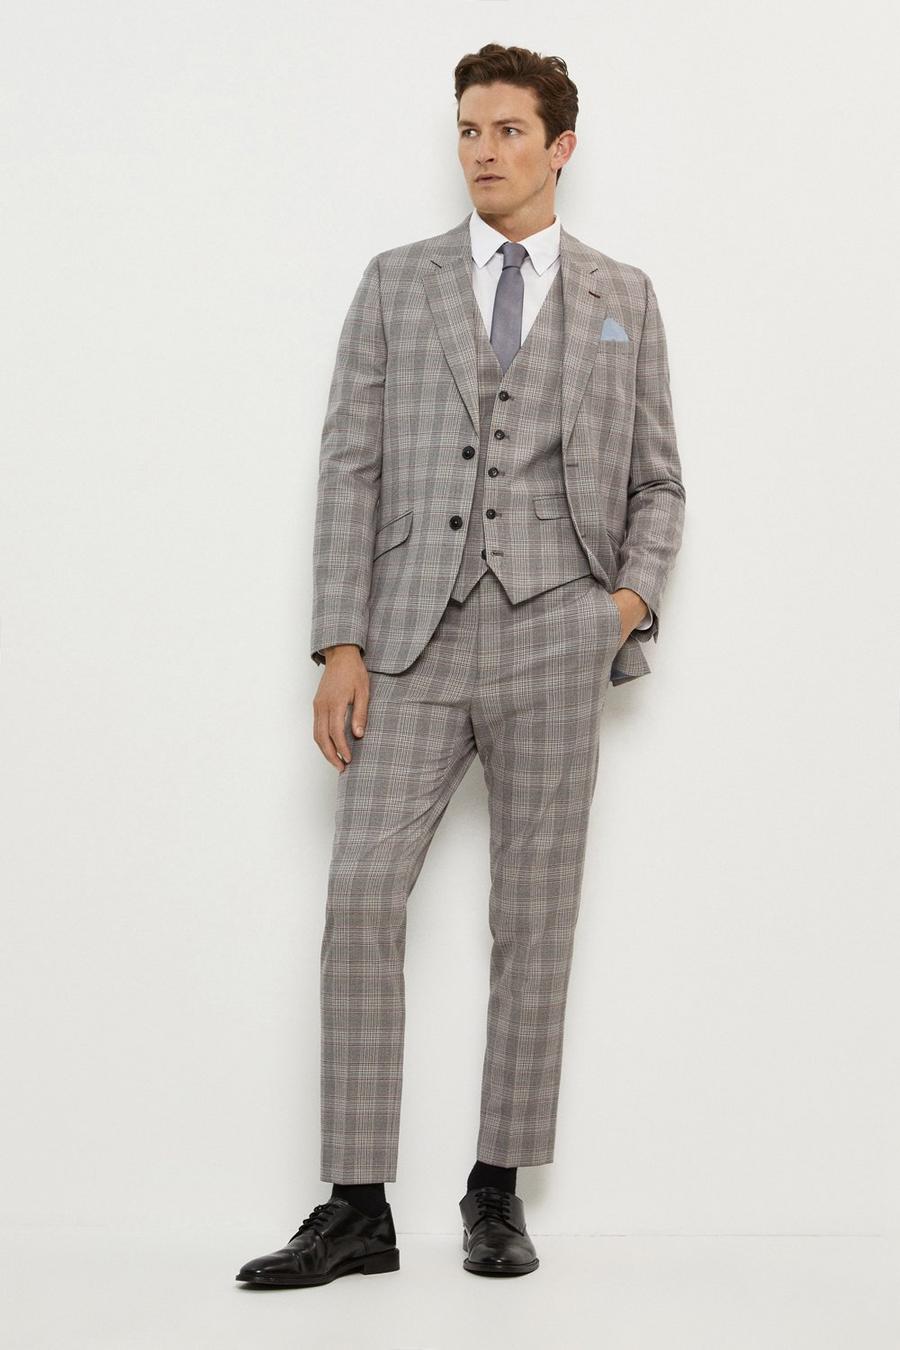 Skinny Grey And Burgundy Check Suit Jacket